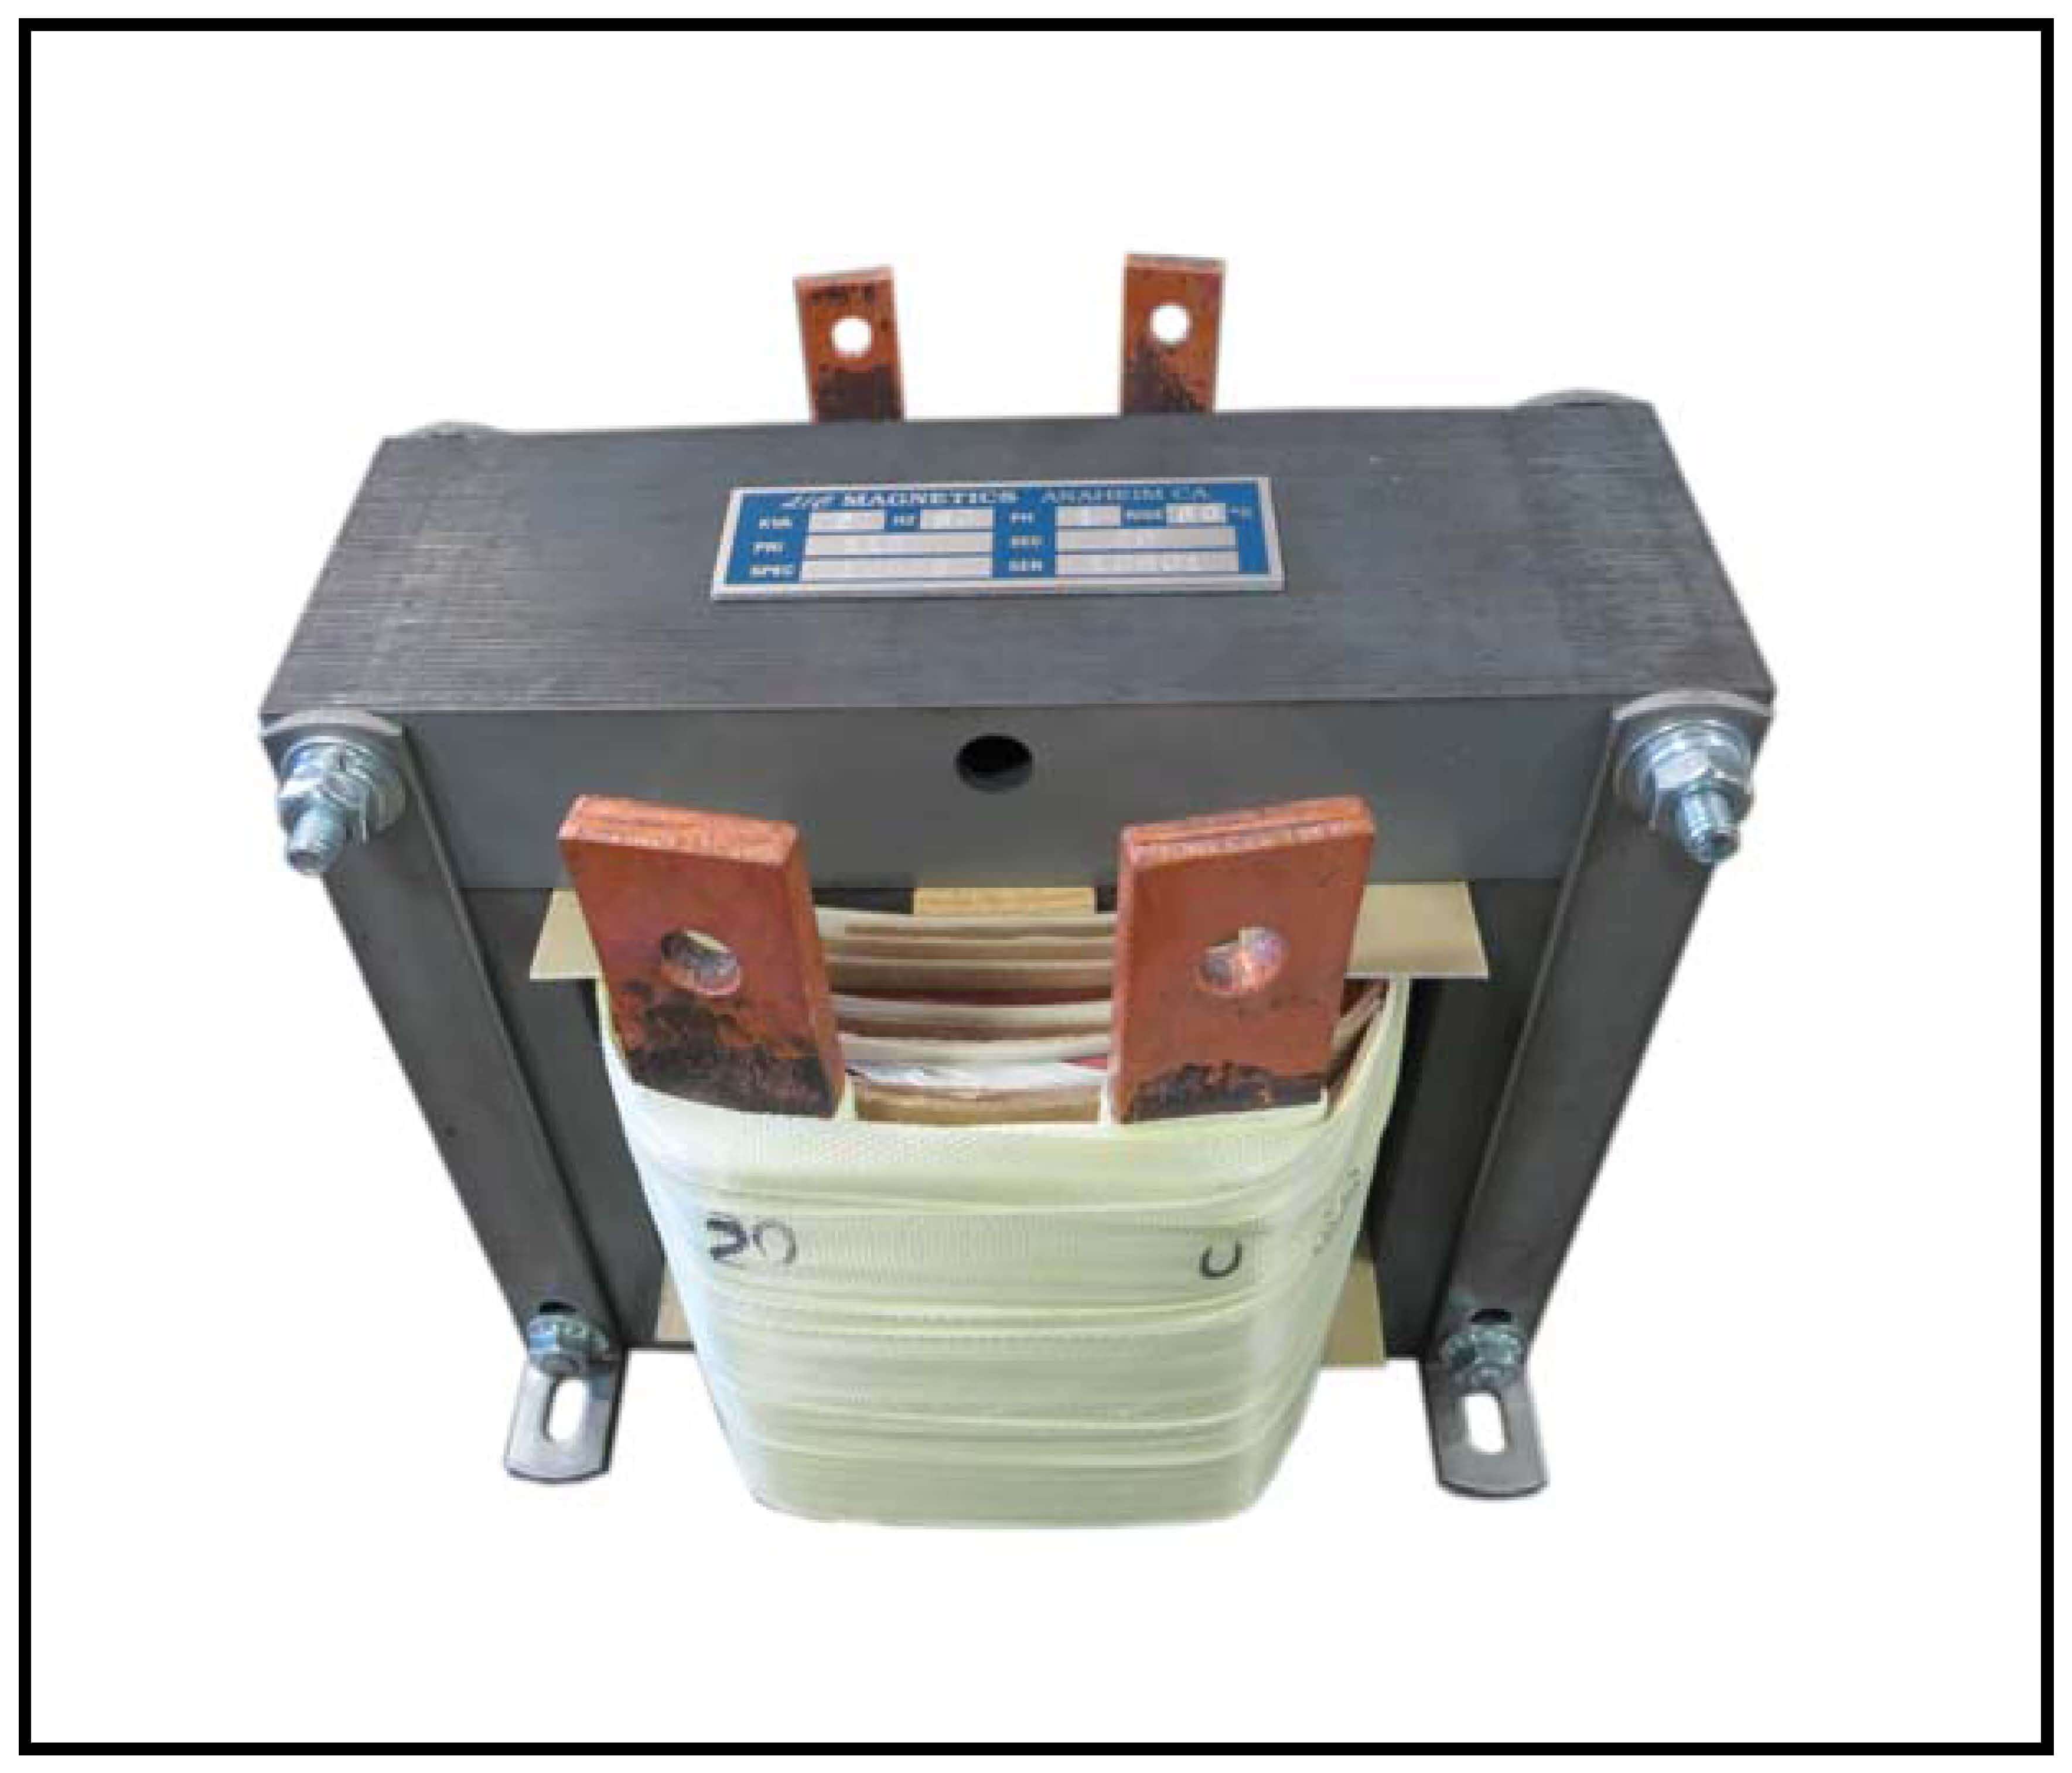 SINGLE PHASE HIGH CURRENT TRANSFORMER, 2 KVA, OUTPUT 20 VAC, 100 AMPS